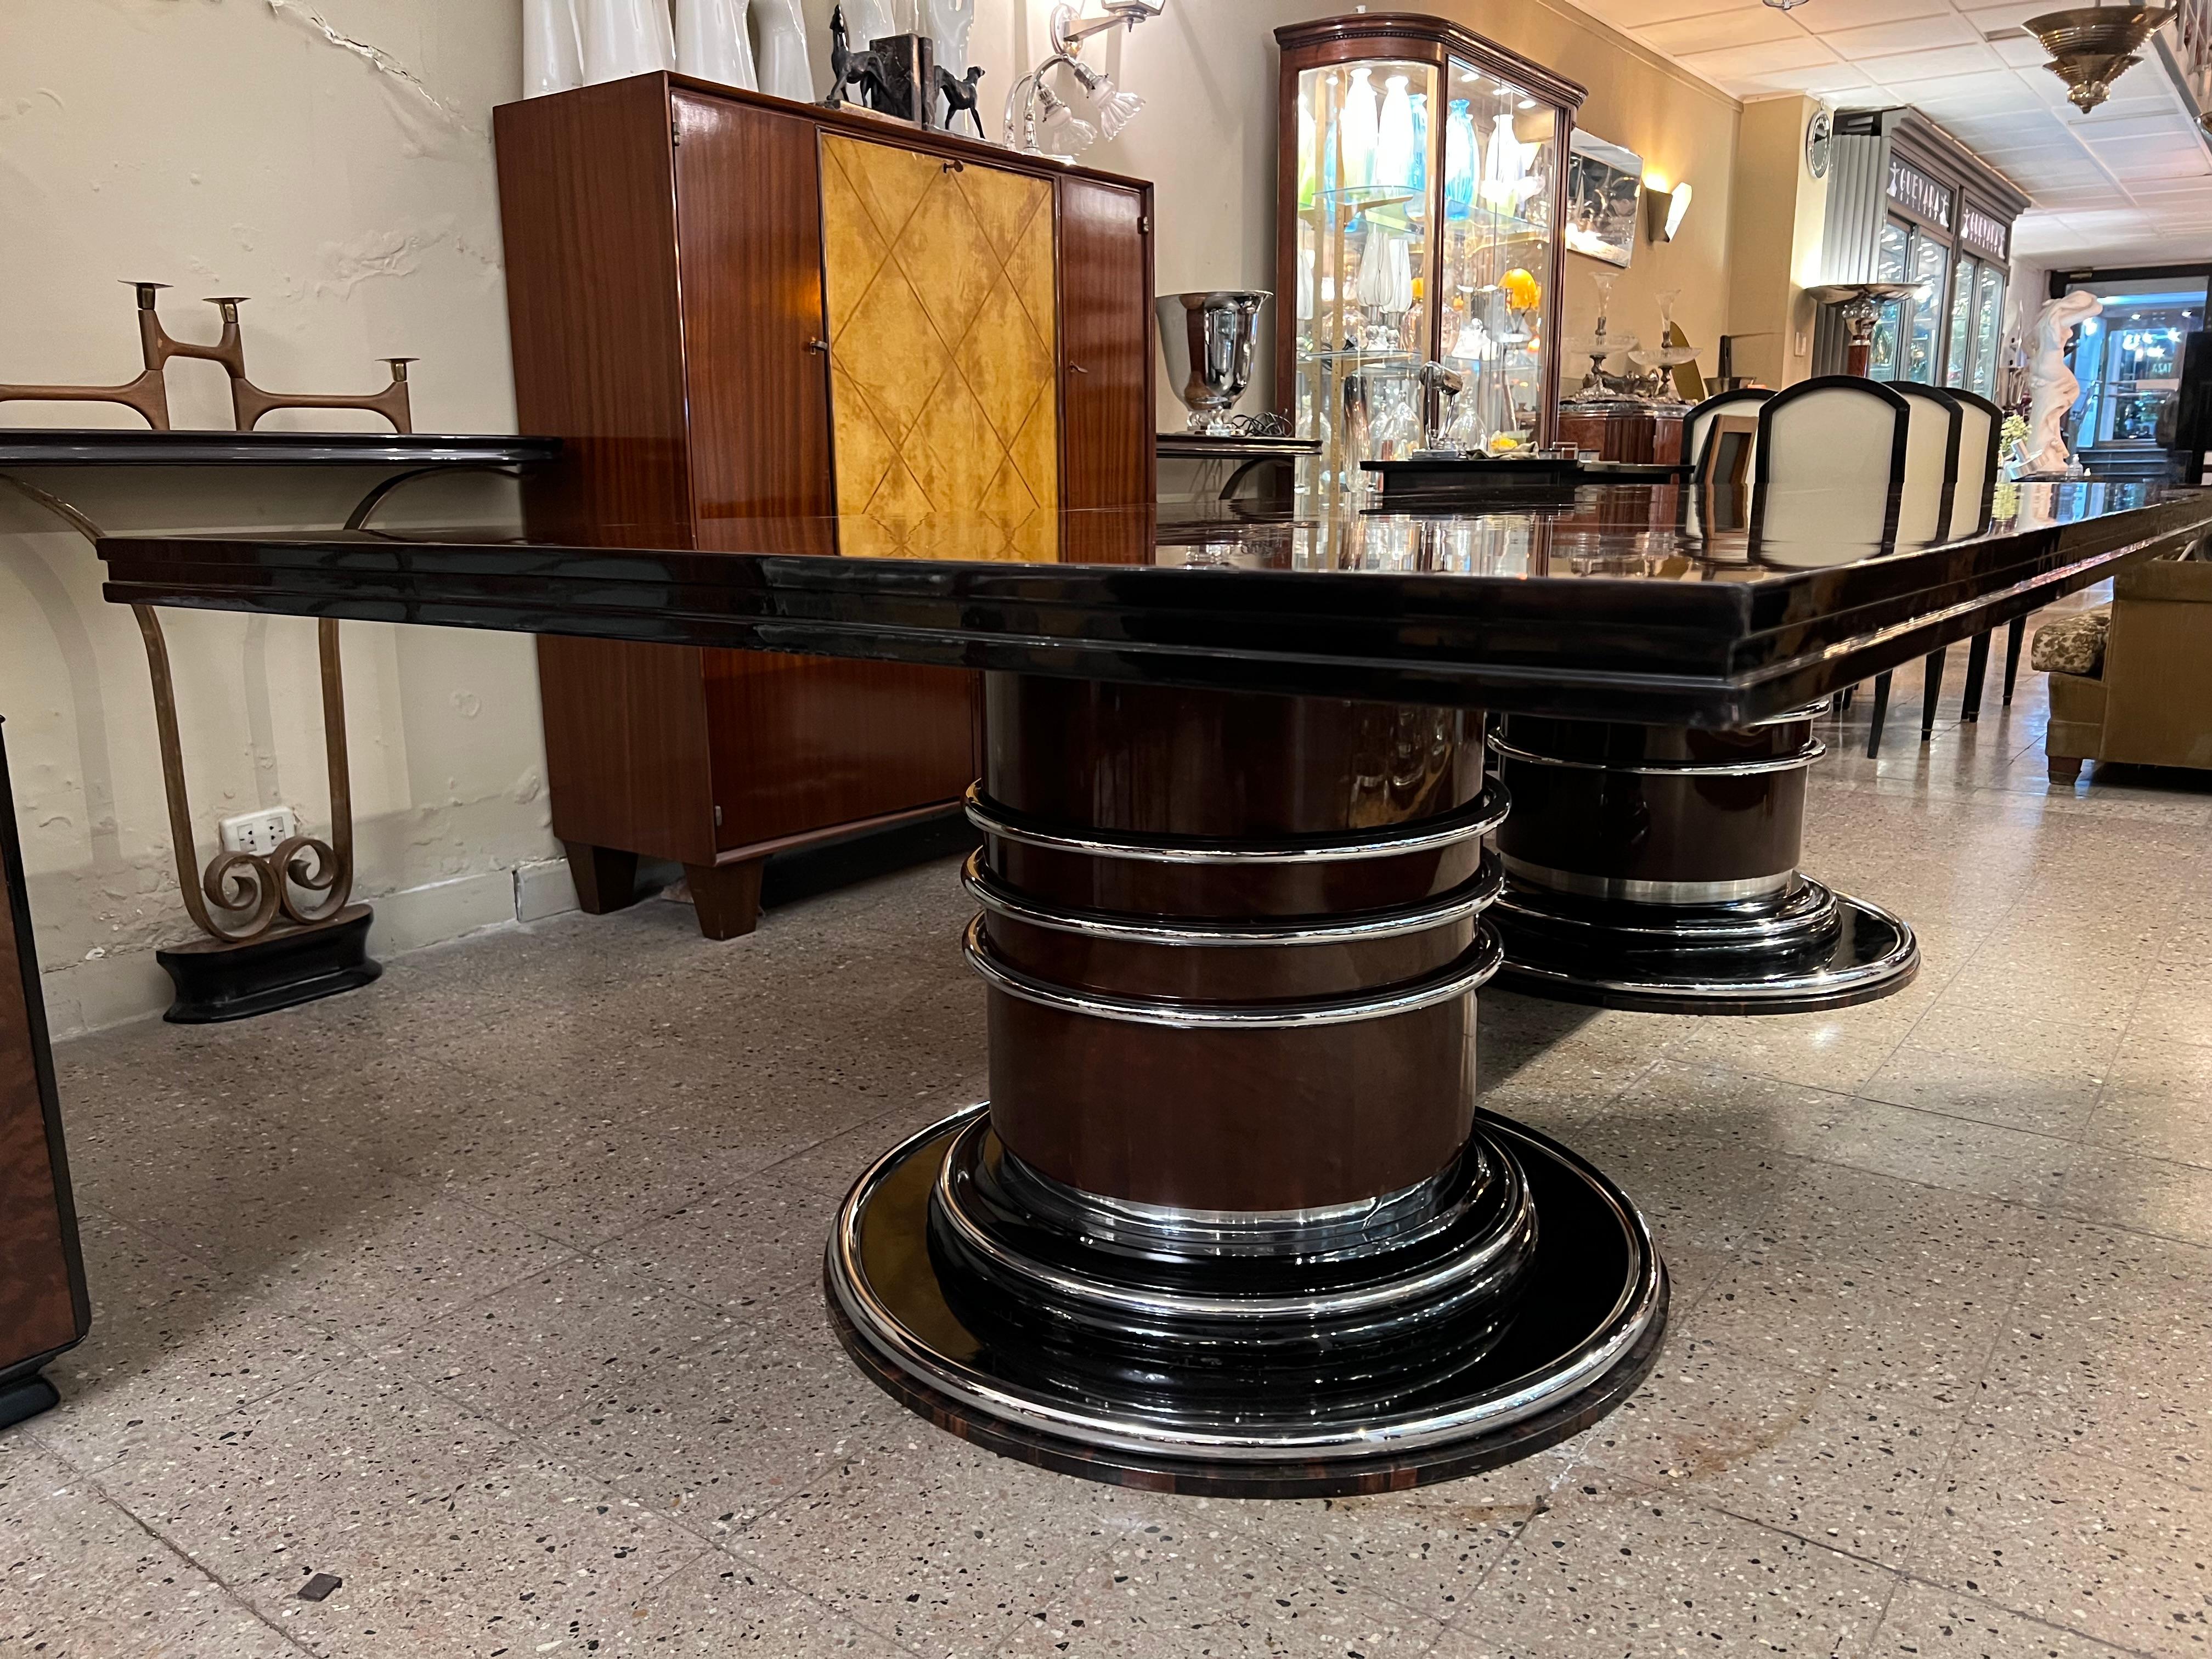 Amaizing Art Deco Table, '12 Persons', 1920, France in Chrome Steel and Wood For Sale 3